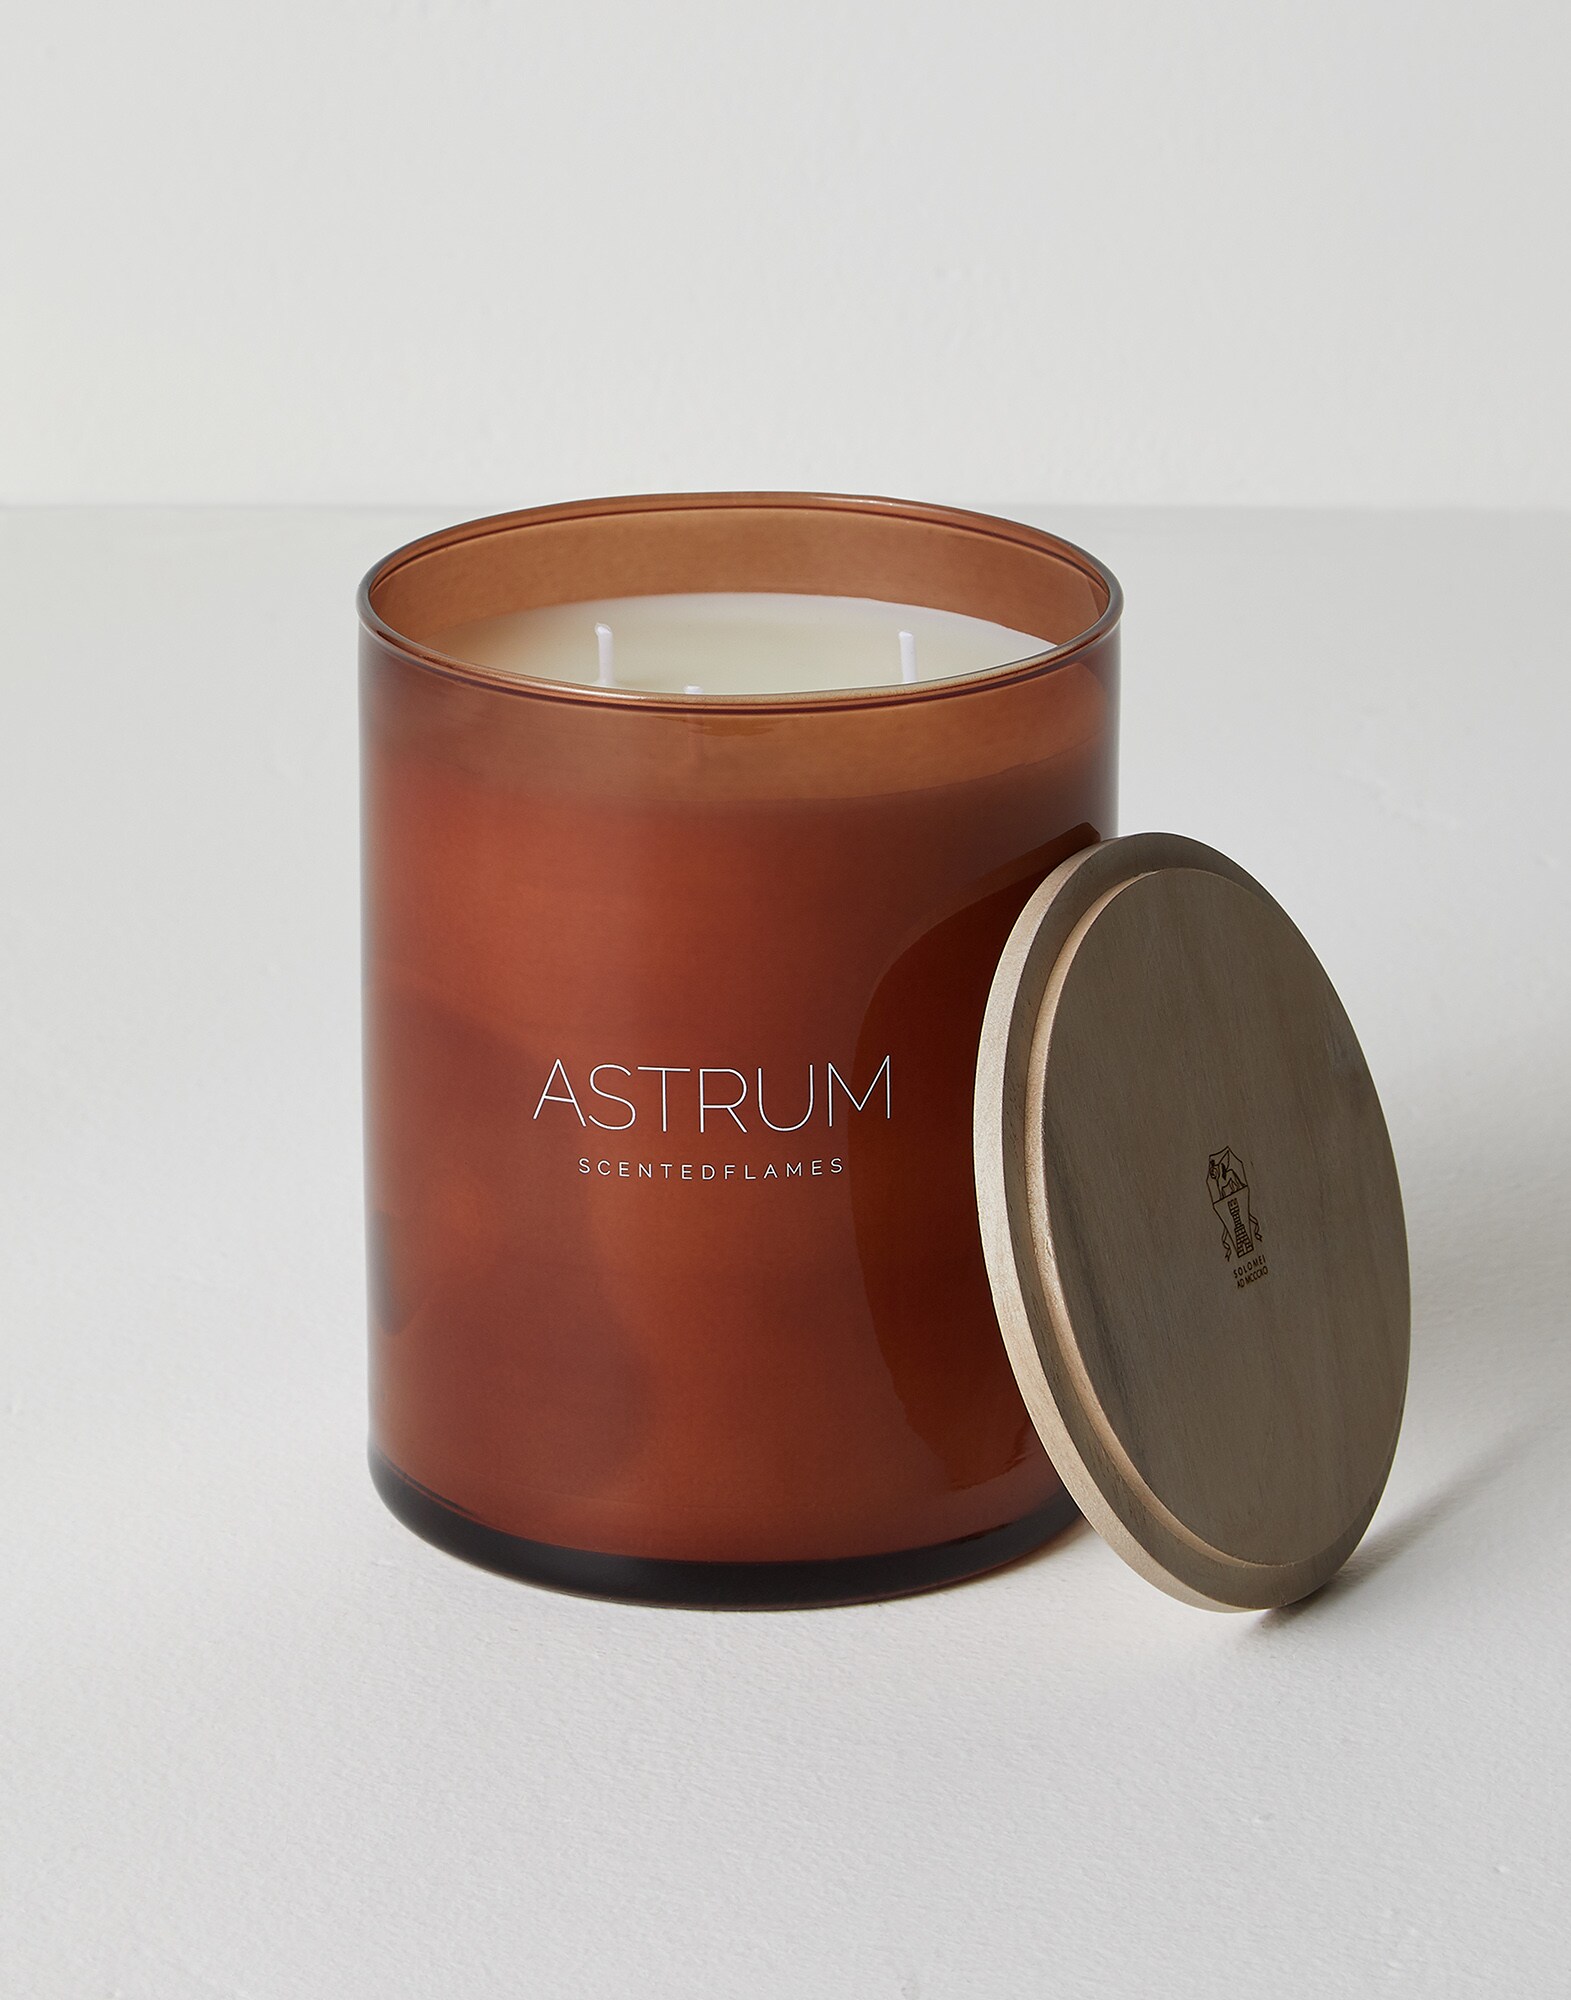 Scented candle with Astrum fragrance